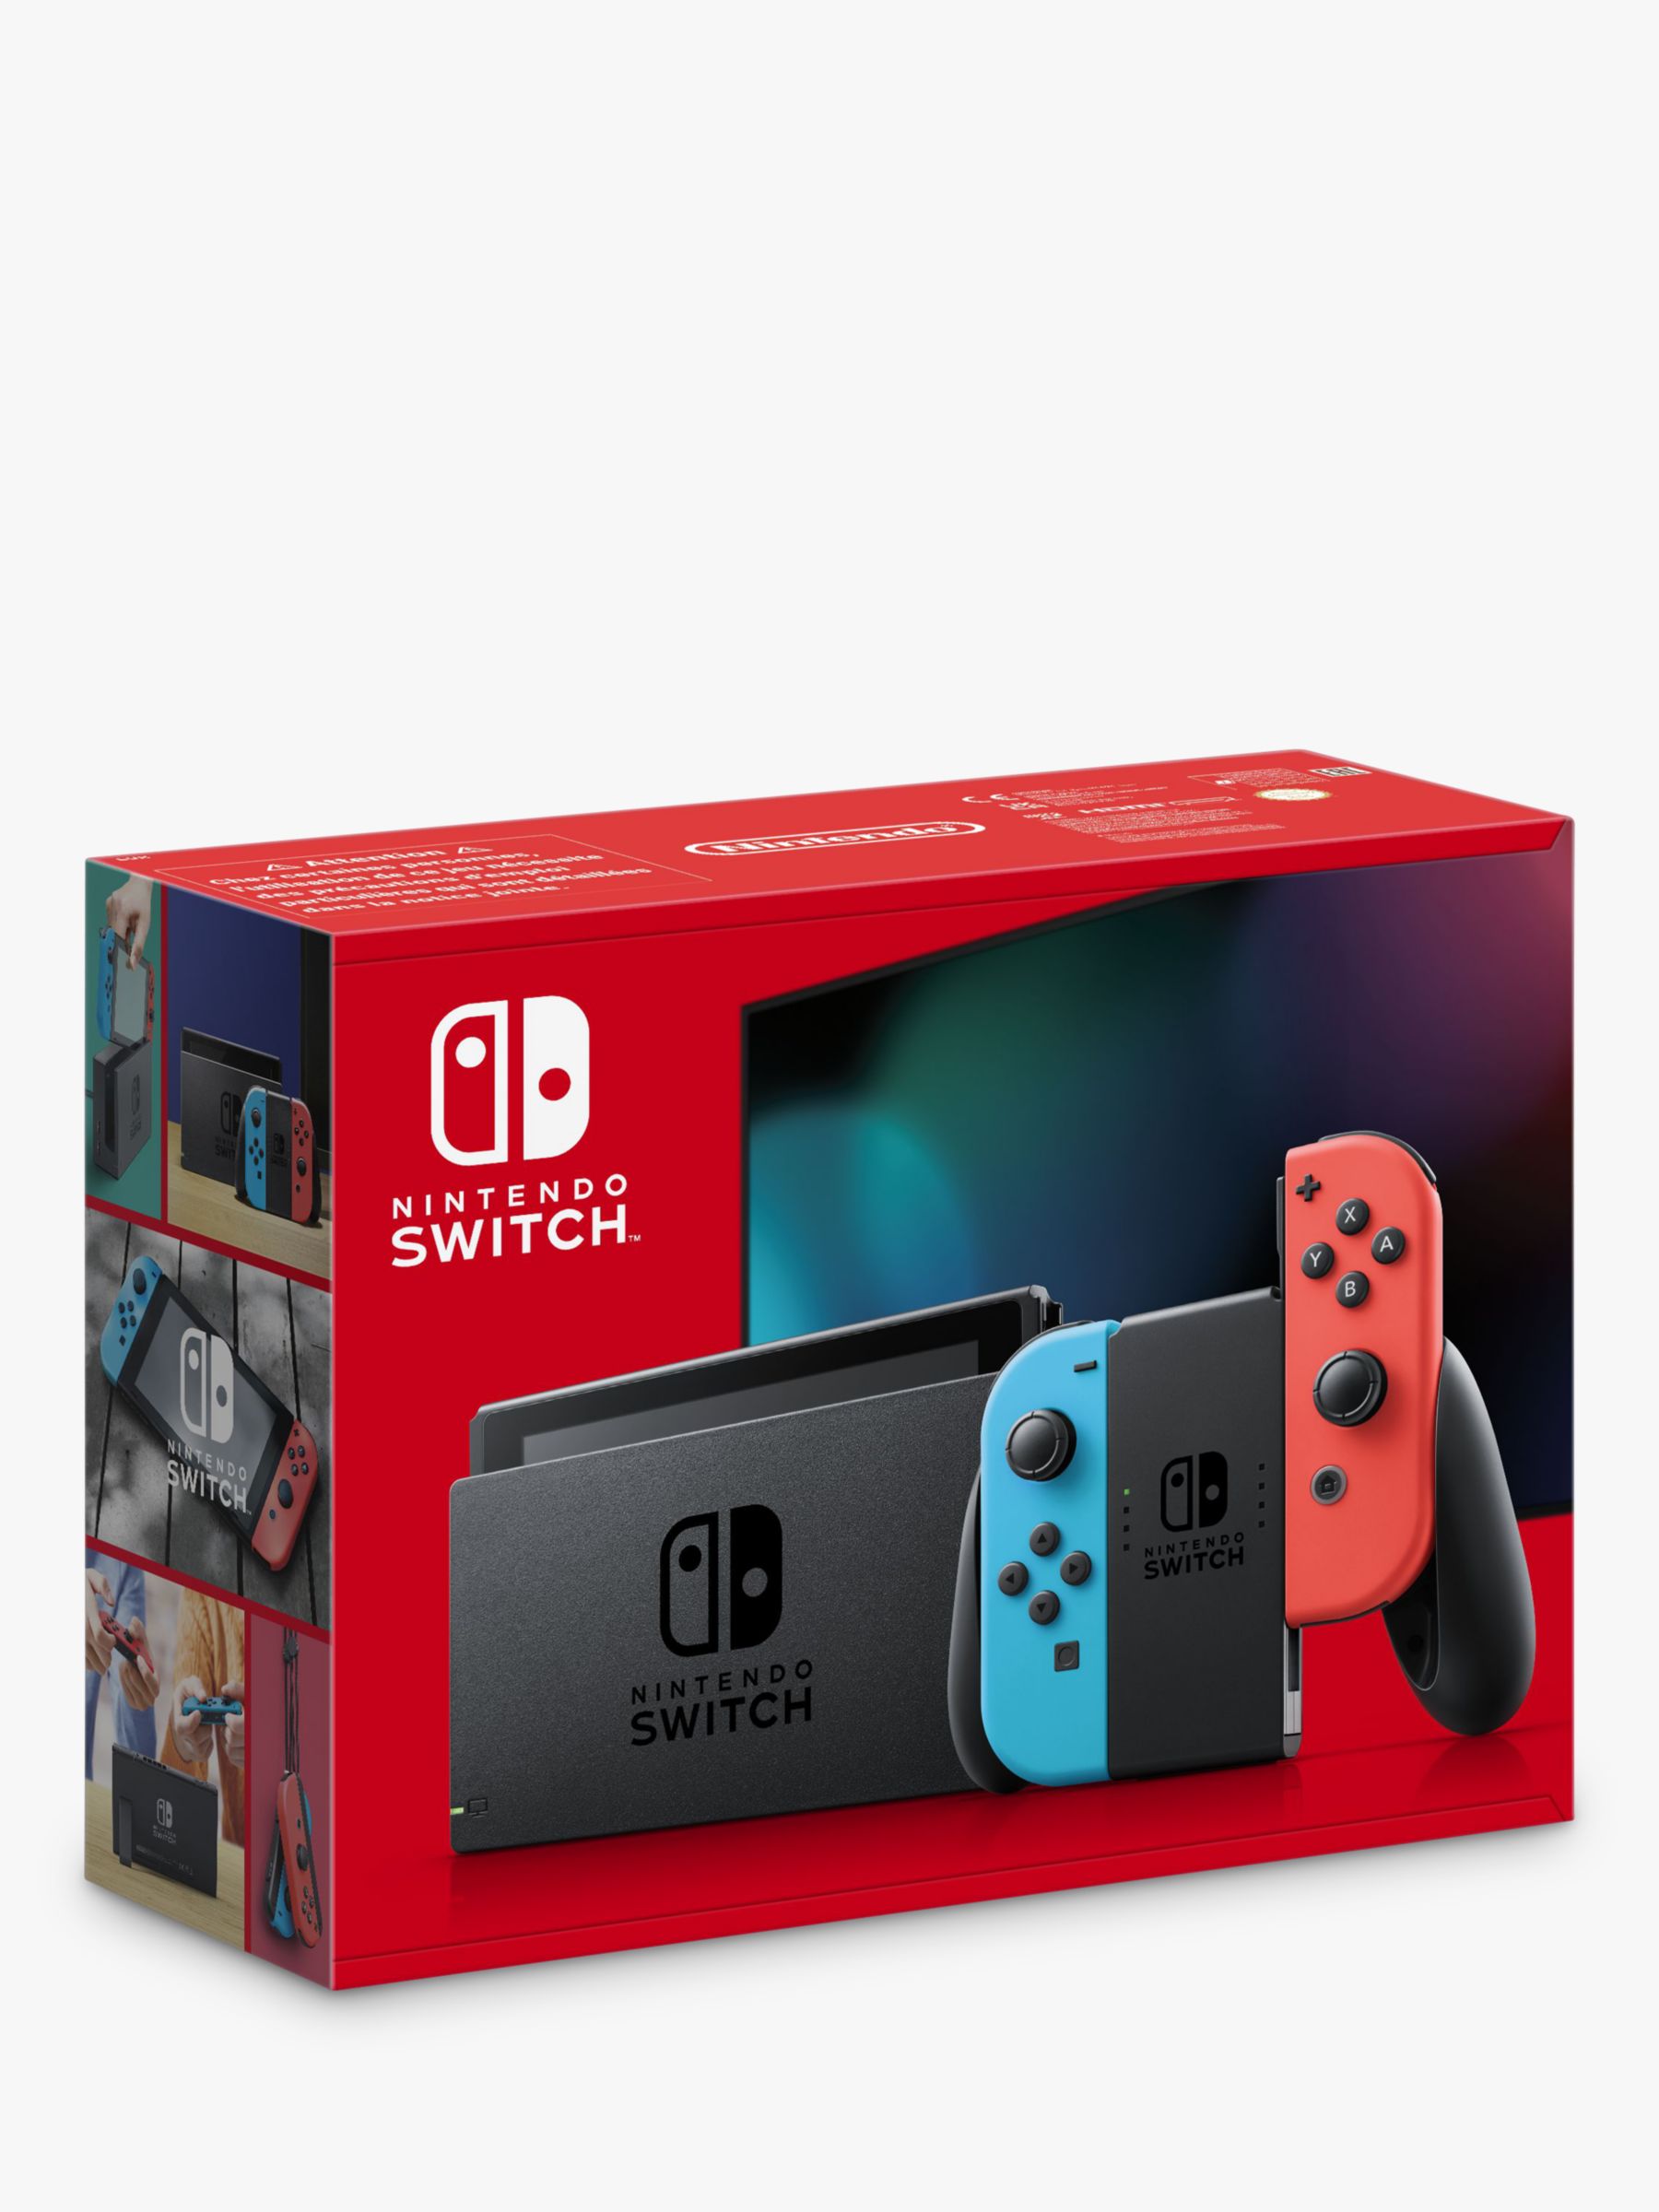 Nintendo Switch 32GB Console with Joy-Con, Neon Red & Blue